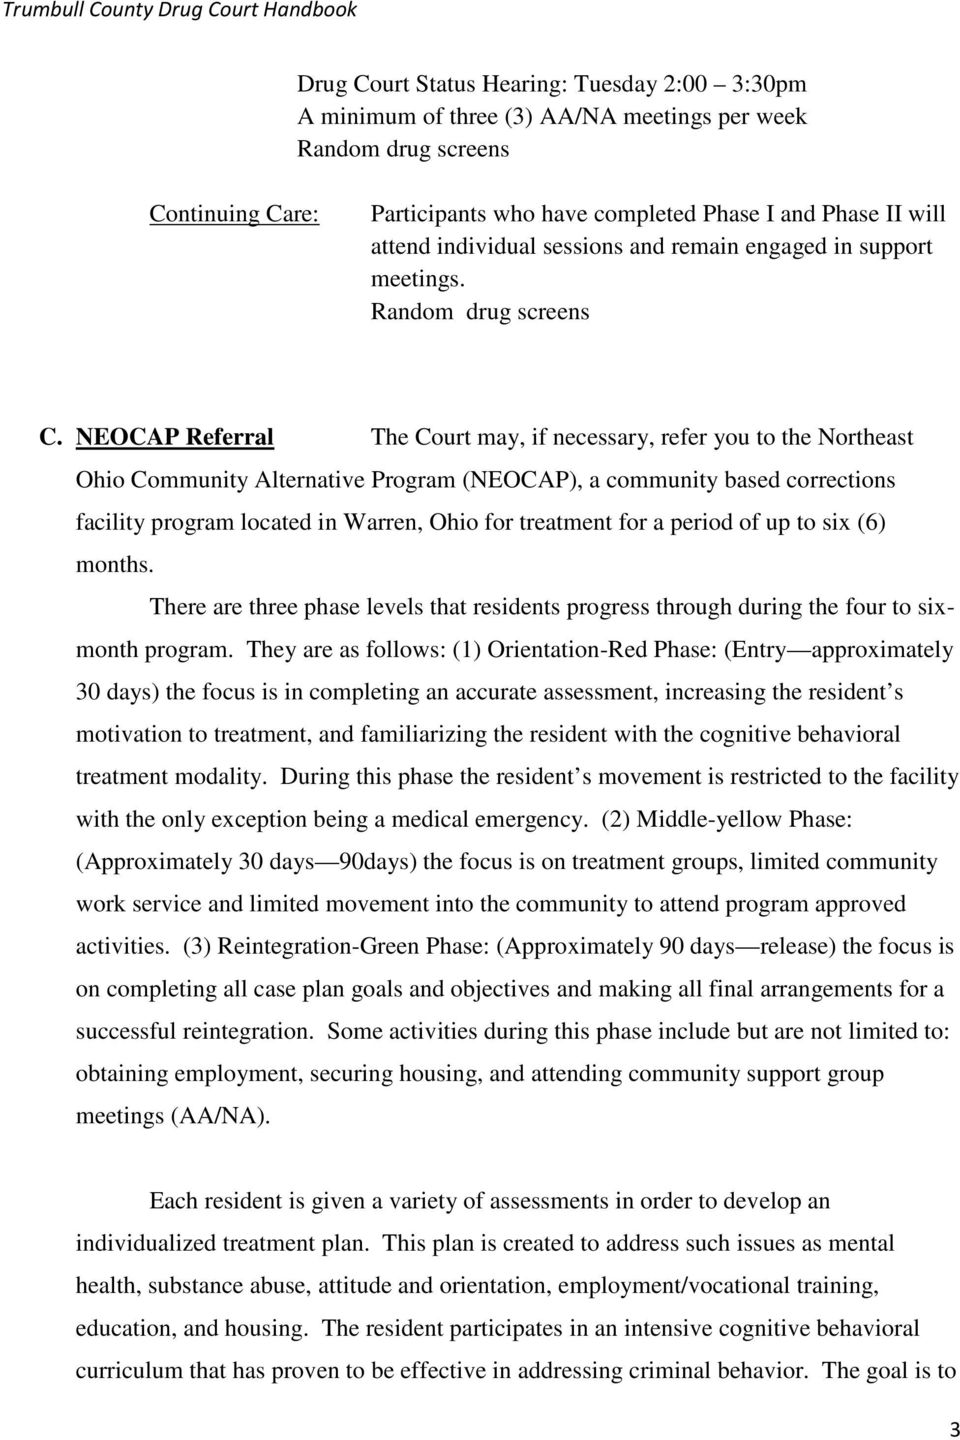 NEOCAP Referral The Court may, if necessary, refer you to the Northeast Ohio Community Alternative Program (NEOCAP), a community based corrections facility program located in Warren, Ohio for